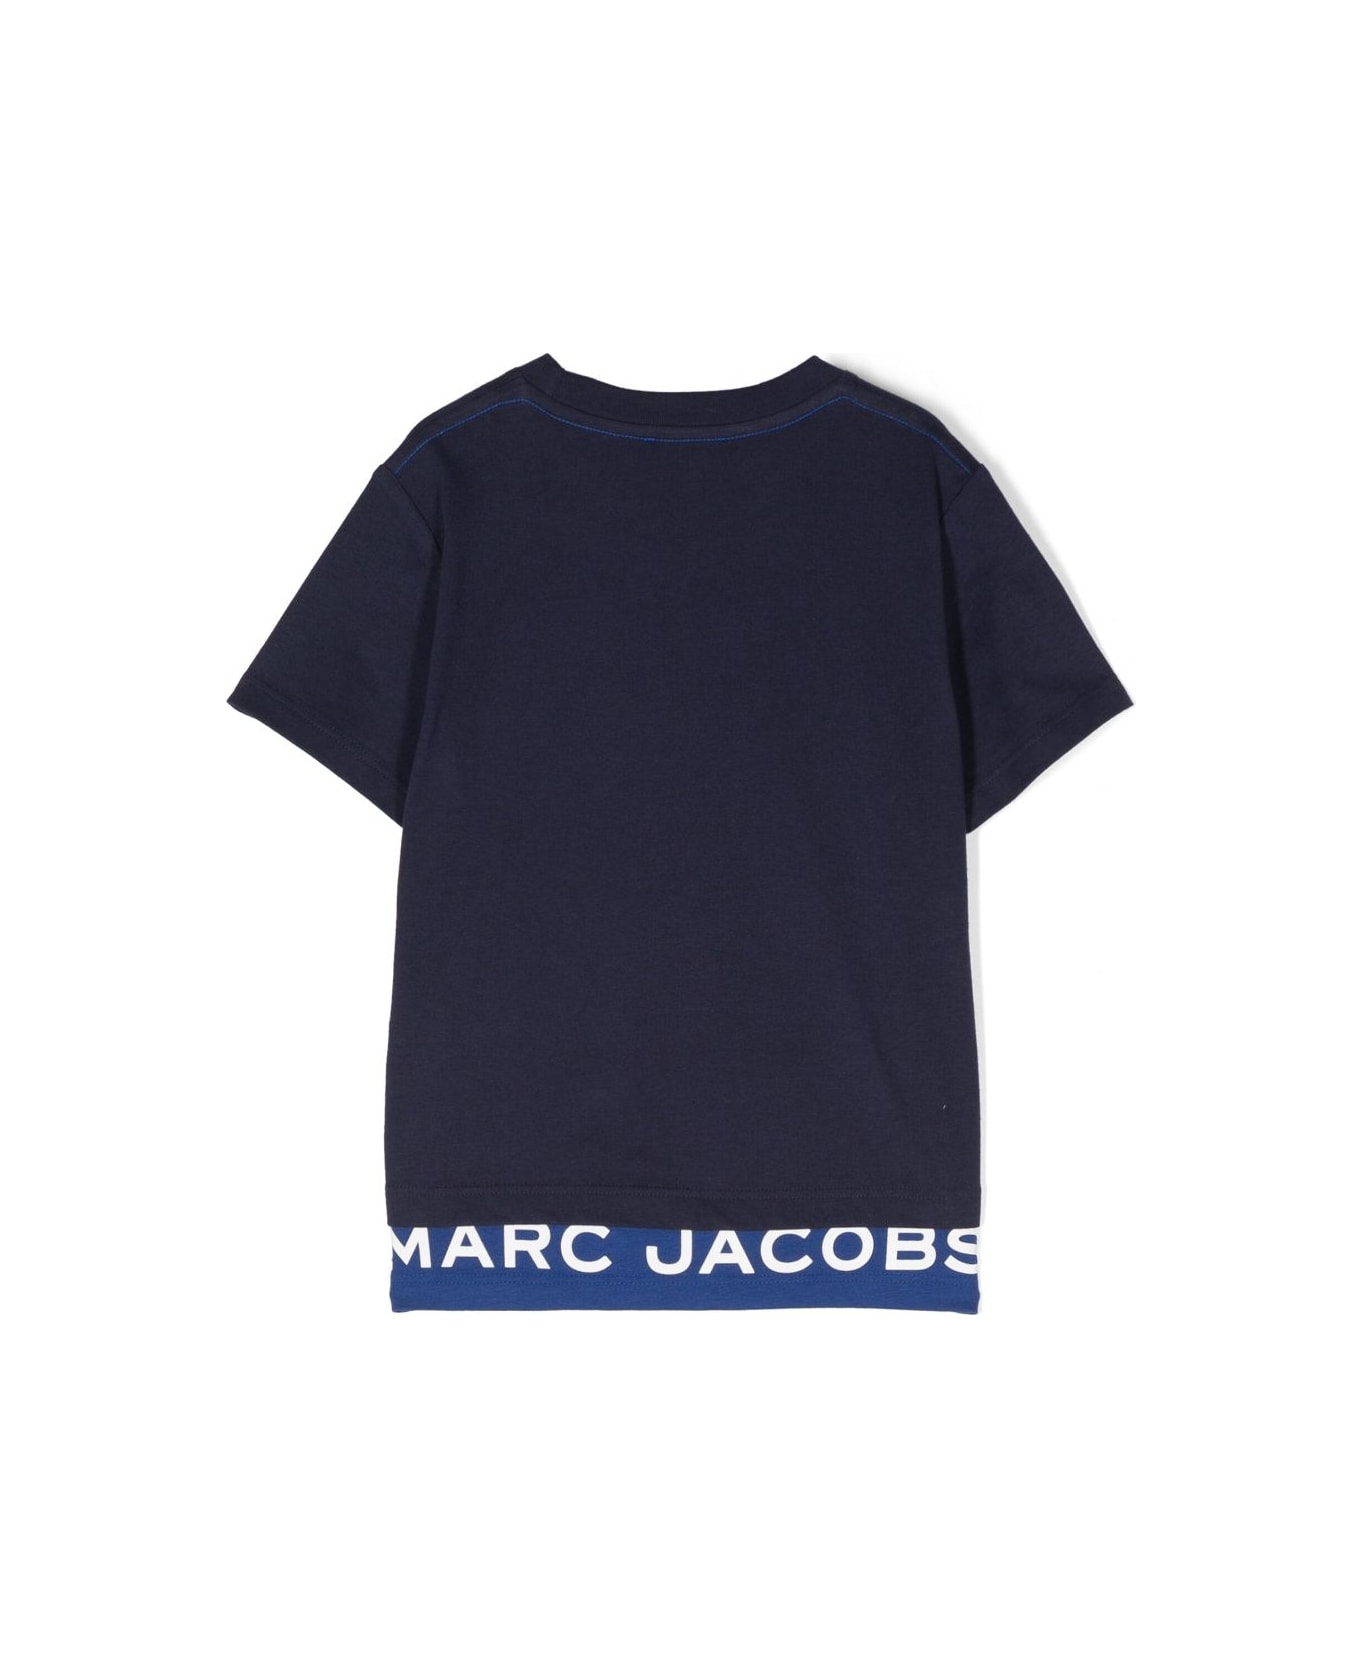 Little Marc Jacobs Marc Jacobs T-shirt Blu Con Pannelli A Contrasto In Jersey Di Cotone Bambino - Blu Tシャツ＆ポロシャツ